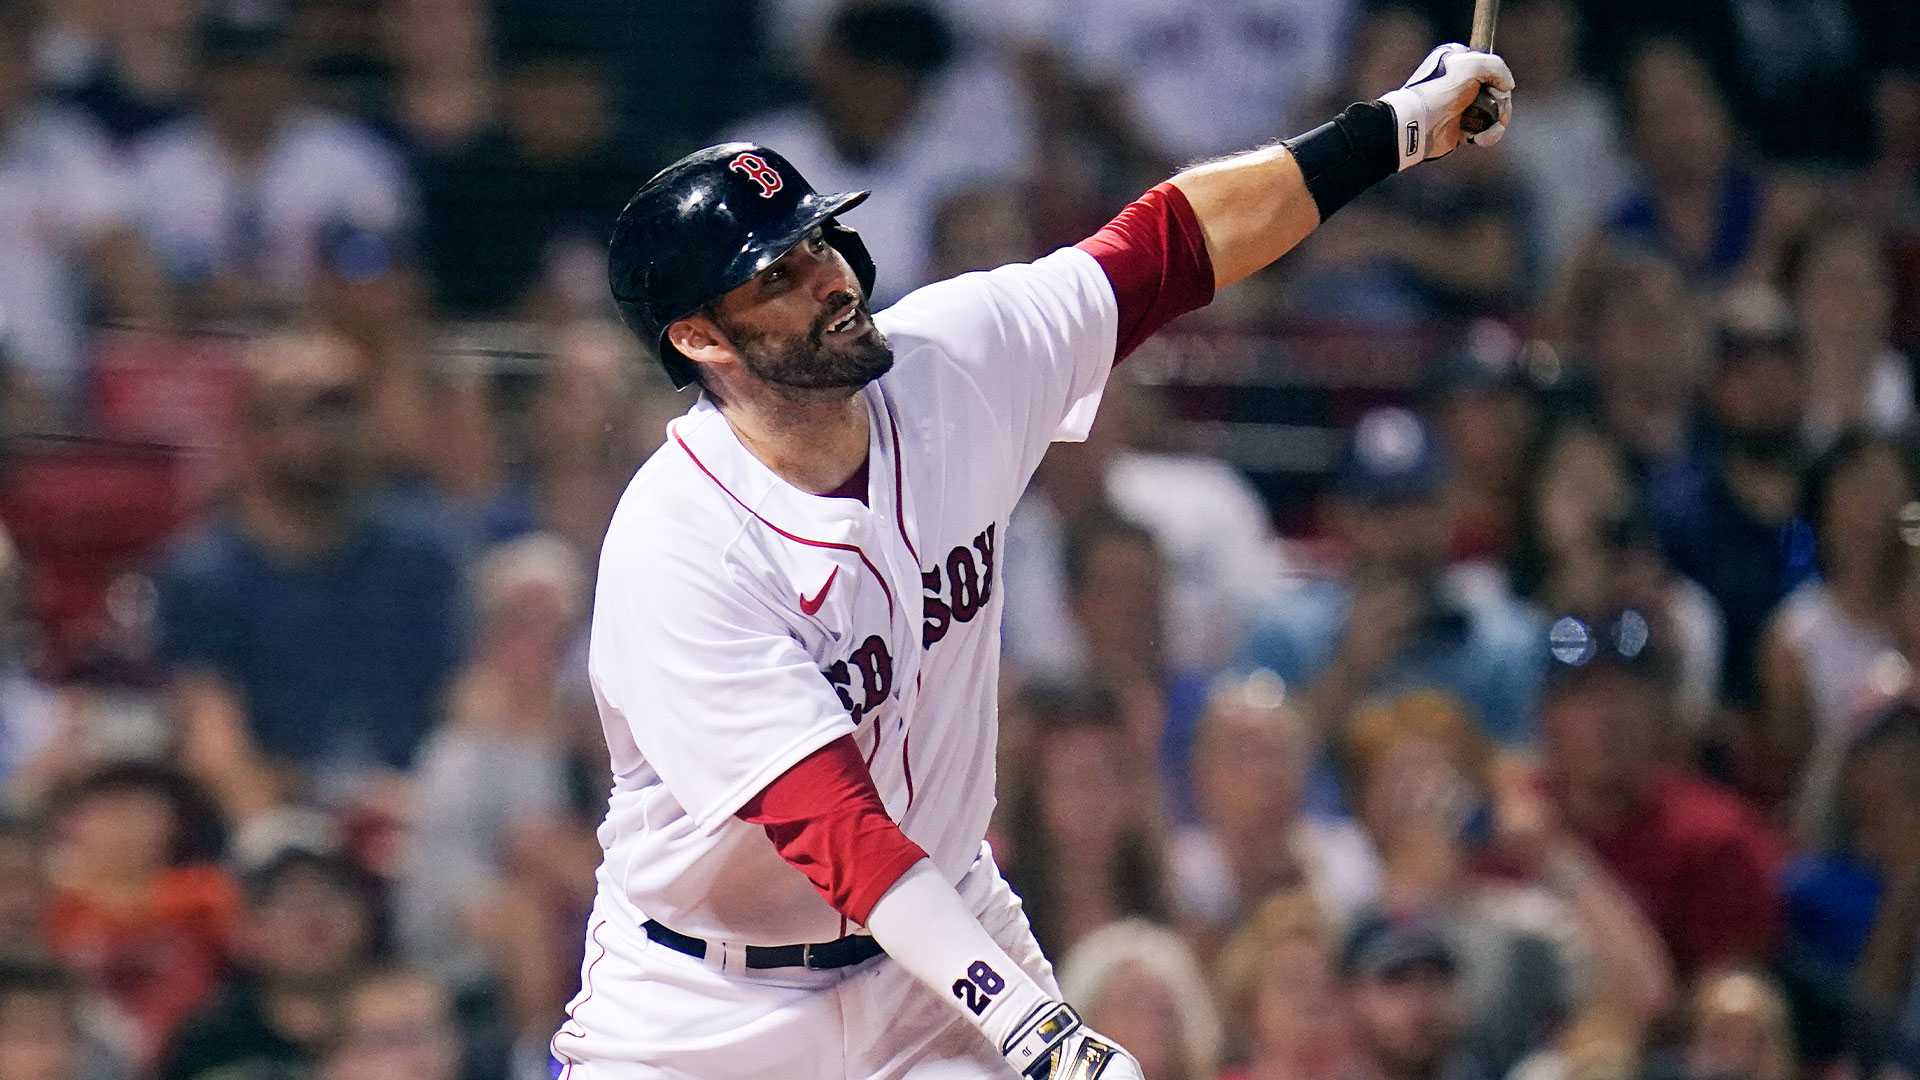 Donnelly: Red Sox' best win of the season over baseball's best